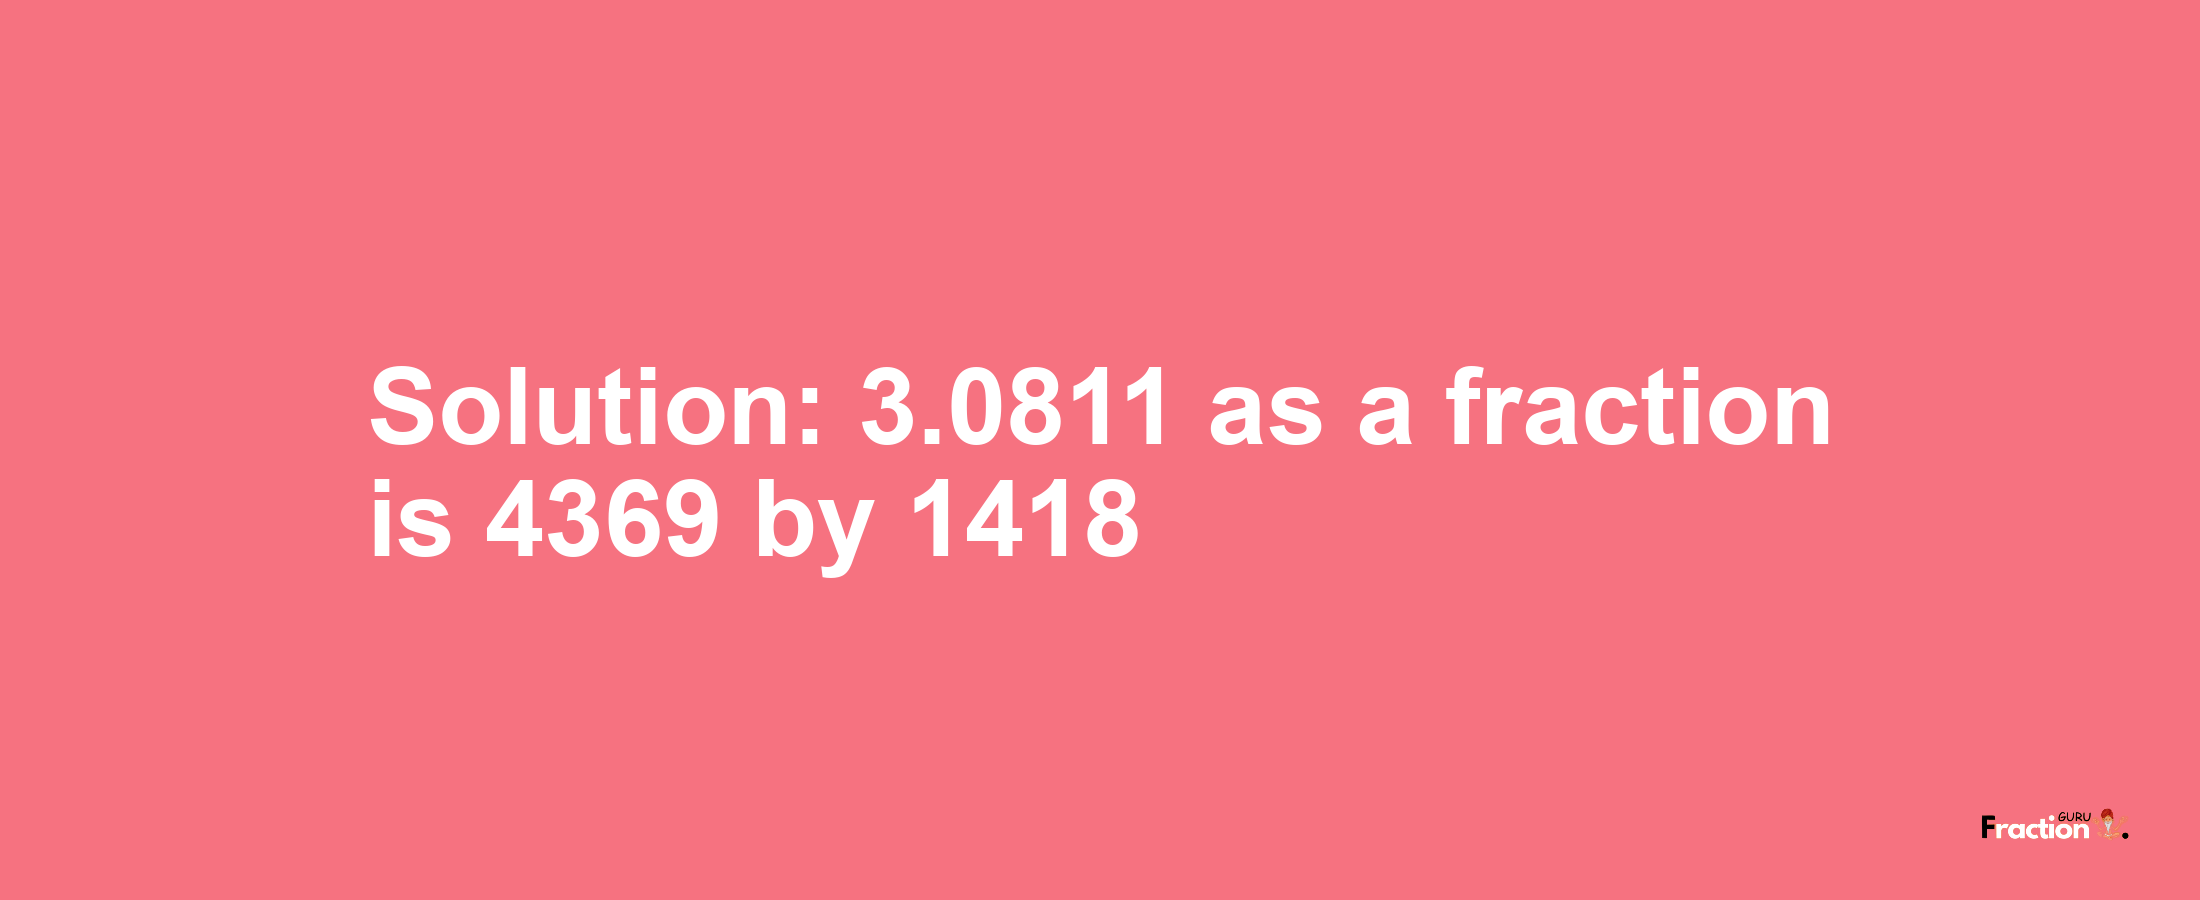 Solution:3.0811 as a fraction is 4369/1418